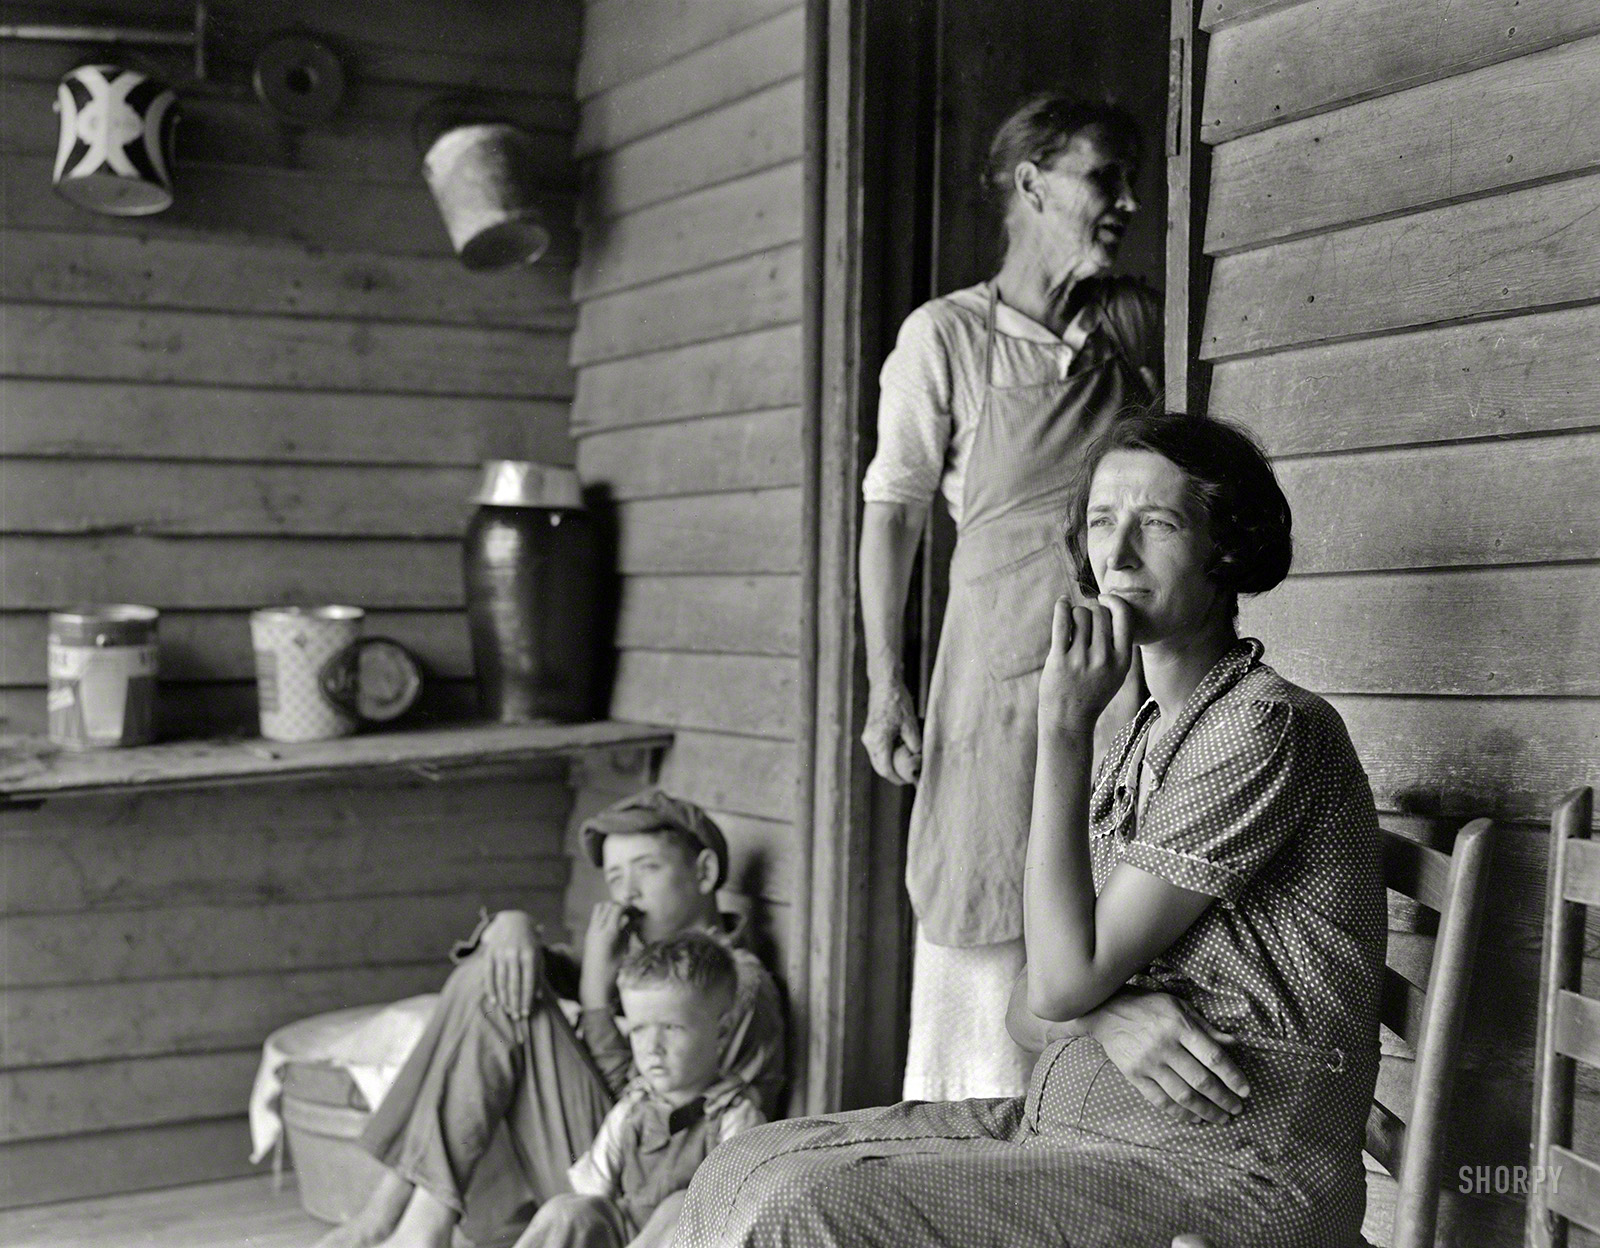 July 1937. "Sharecropper's wife, mother of seven. Woman in doorway is mother of fourteen, ten living; fifty-six grandchildren. Near Chesnee, South Carolina." Photo by Dorothea Lange for the Farm Security Administration. View full size.